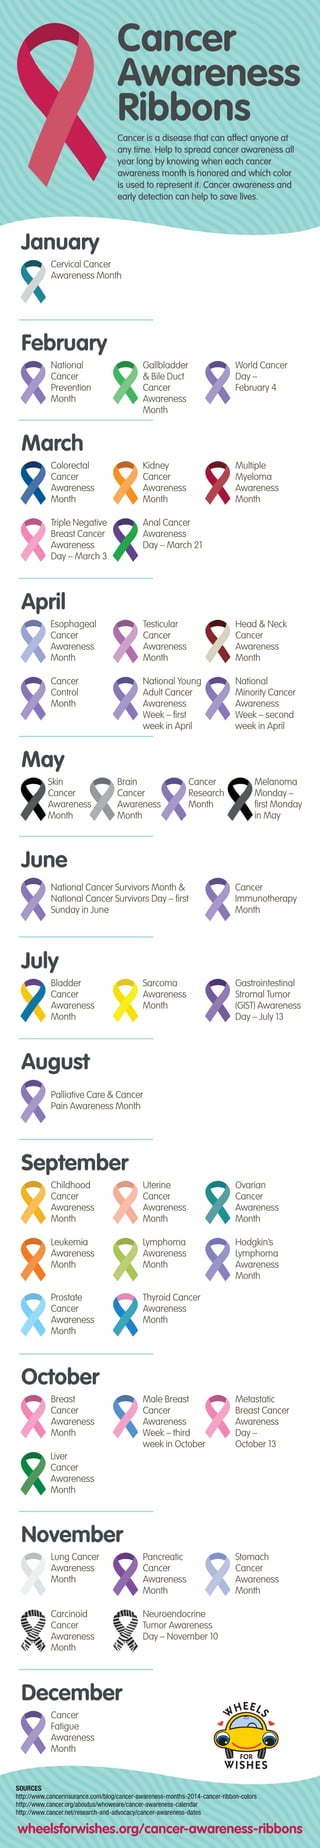 SOURCES
http://www.cancerinsurance.com/blog/cancer-awareness-months-2014-cancer-ribbon-colors
http://www.cancer.org/aboutus/whoweare/cancer-awareness-calendar
http://www.cancer.net/research-and-advocacy/cancer-awareness-dates
wheelsforwishes.org/cancer-awareness-ribbons
Cancer
Awareness
Ribbons
Cancer is a disease that can affect anyone at
any time. Help to spread cancer awareness all
year long by knowing when each cancer
awareness month is honored and which color
is used to represent it. Cancer awareness and
early detection can help to save lives.
September
Childhood
Cancer
Awareness
Month
Uterine
Cancer
Awareness
Month
Ovarian
Cancer
Awareness
Month
Leukemia
Awareness
Month
Lymphoma
Awareness
Month
Hodgkin’s
Lymphoma
Awareness
Month
Prostate
Cancer
Awareness
Month
Thyroid Cancer
Awareness
Month
August
Palliative Care & Cancer
Pain Awareness Month
November
Lung Cancer
Awareness
Month
Pancreatic
Cancer
Awareness
Month
Stomach
Cancer
Awareness
Month
Carcinoid
Cancer
Awareness
Month
Neuroendocrine
Tumor Awareness
Day – November 10
December
Cancer
Fatigue
Awareness
Month
July
Bladder
Cancer
Awareness
Month
Sarcoma
Awareness
Month
Gastrointestinal
Stromal Tumor
(GIST) Awareness
Day – July 13
June
National Cancer Survivors Month &
National Cancer Survivors Day – first
Sunday in June
Cancer
Immunotherapy
Month
May
Skin
Cancer
Awareness
Month
Brain
Cancer
Awareness
Month
Cancer
Research
Month
Melanoma
Monday –
first Monday
in May
March
Colorectal
Cancer
Awareness
Month
Kidney
Cancer
Awareness
Month
Multiple
Myeloma
Awareness
Month
Triple Negative
Breast Cancer
Awareness
Day – March 3
Anal Cancer
Awareness
Day – March 21
February
National
Cancer
Prevention
Month
Gallbladder
& Bile Duct
Cancer
Awareness
Month
World Cancer
Day –
February 4
January
Cervical Cancer
Awareness Month
October
Breast
Cancer
Awareness
Month
Liver
Cancer
Awareness
Month
Metastatic
Breast Cancer
Awareness
Day –
October 13
April
National Young
Adult Cancer
Awareness
Week – first
week in April
National
Minority Cancer
Awareness
Week – second
week in April
Cancer
Control
Month
Esophageal
Cancer
Awareness
Month
Testicular
Cancer
Awareness
Month
Head & Neck
Cancer
Awareness
Month
Male Breast
Cancer
Awareness
Week – third
week in October
 